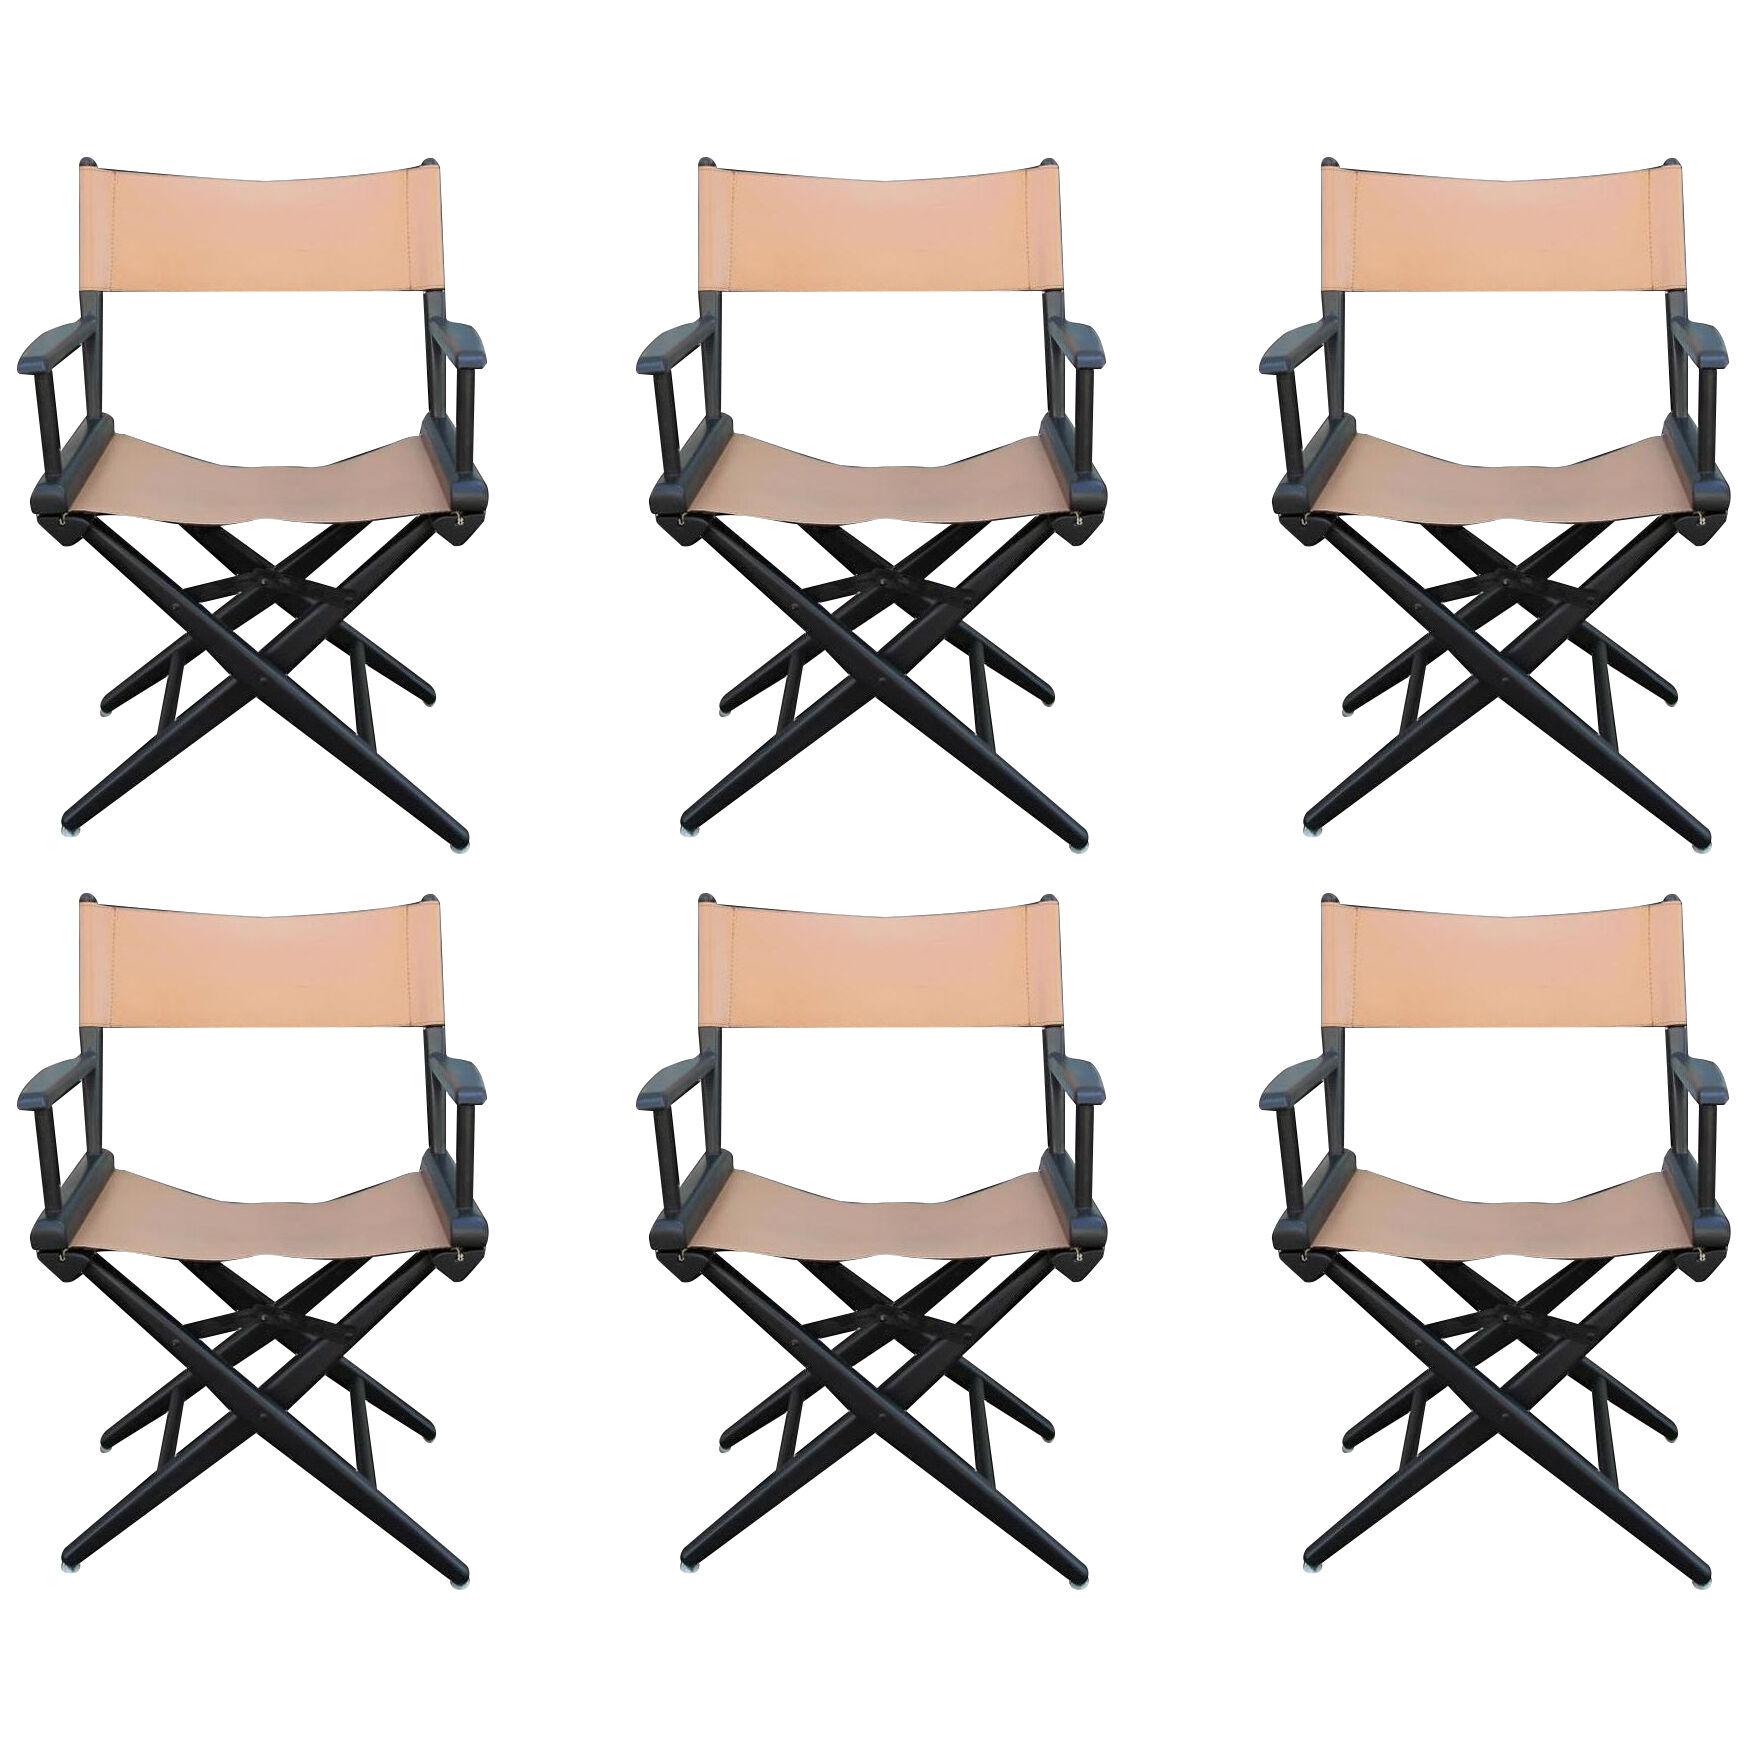 Black and Tan Leather Casual Director's Chairs by Telescope Co. - Set of 6